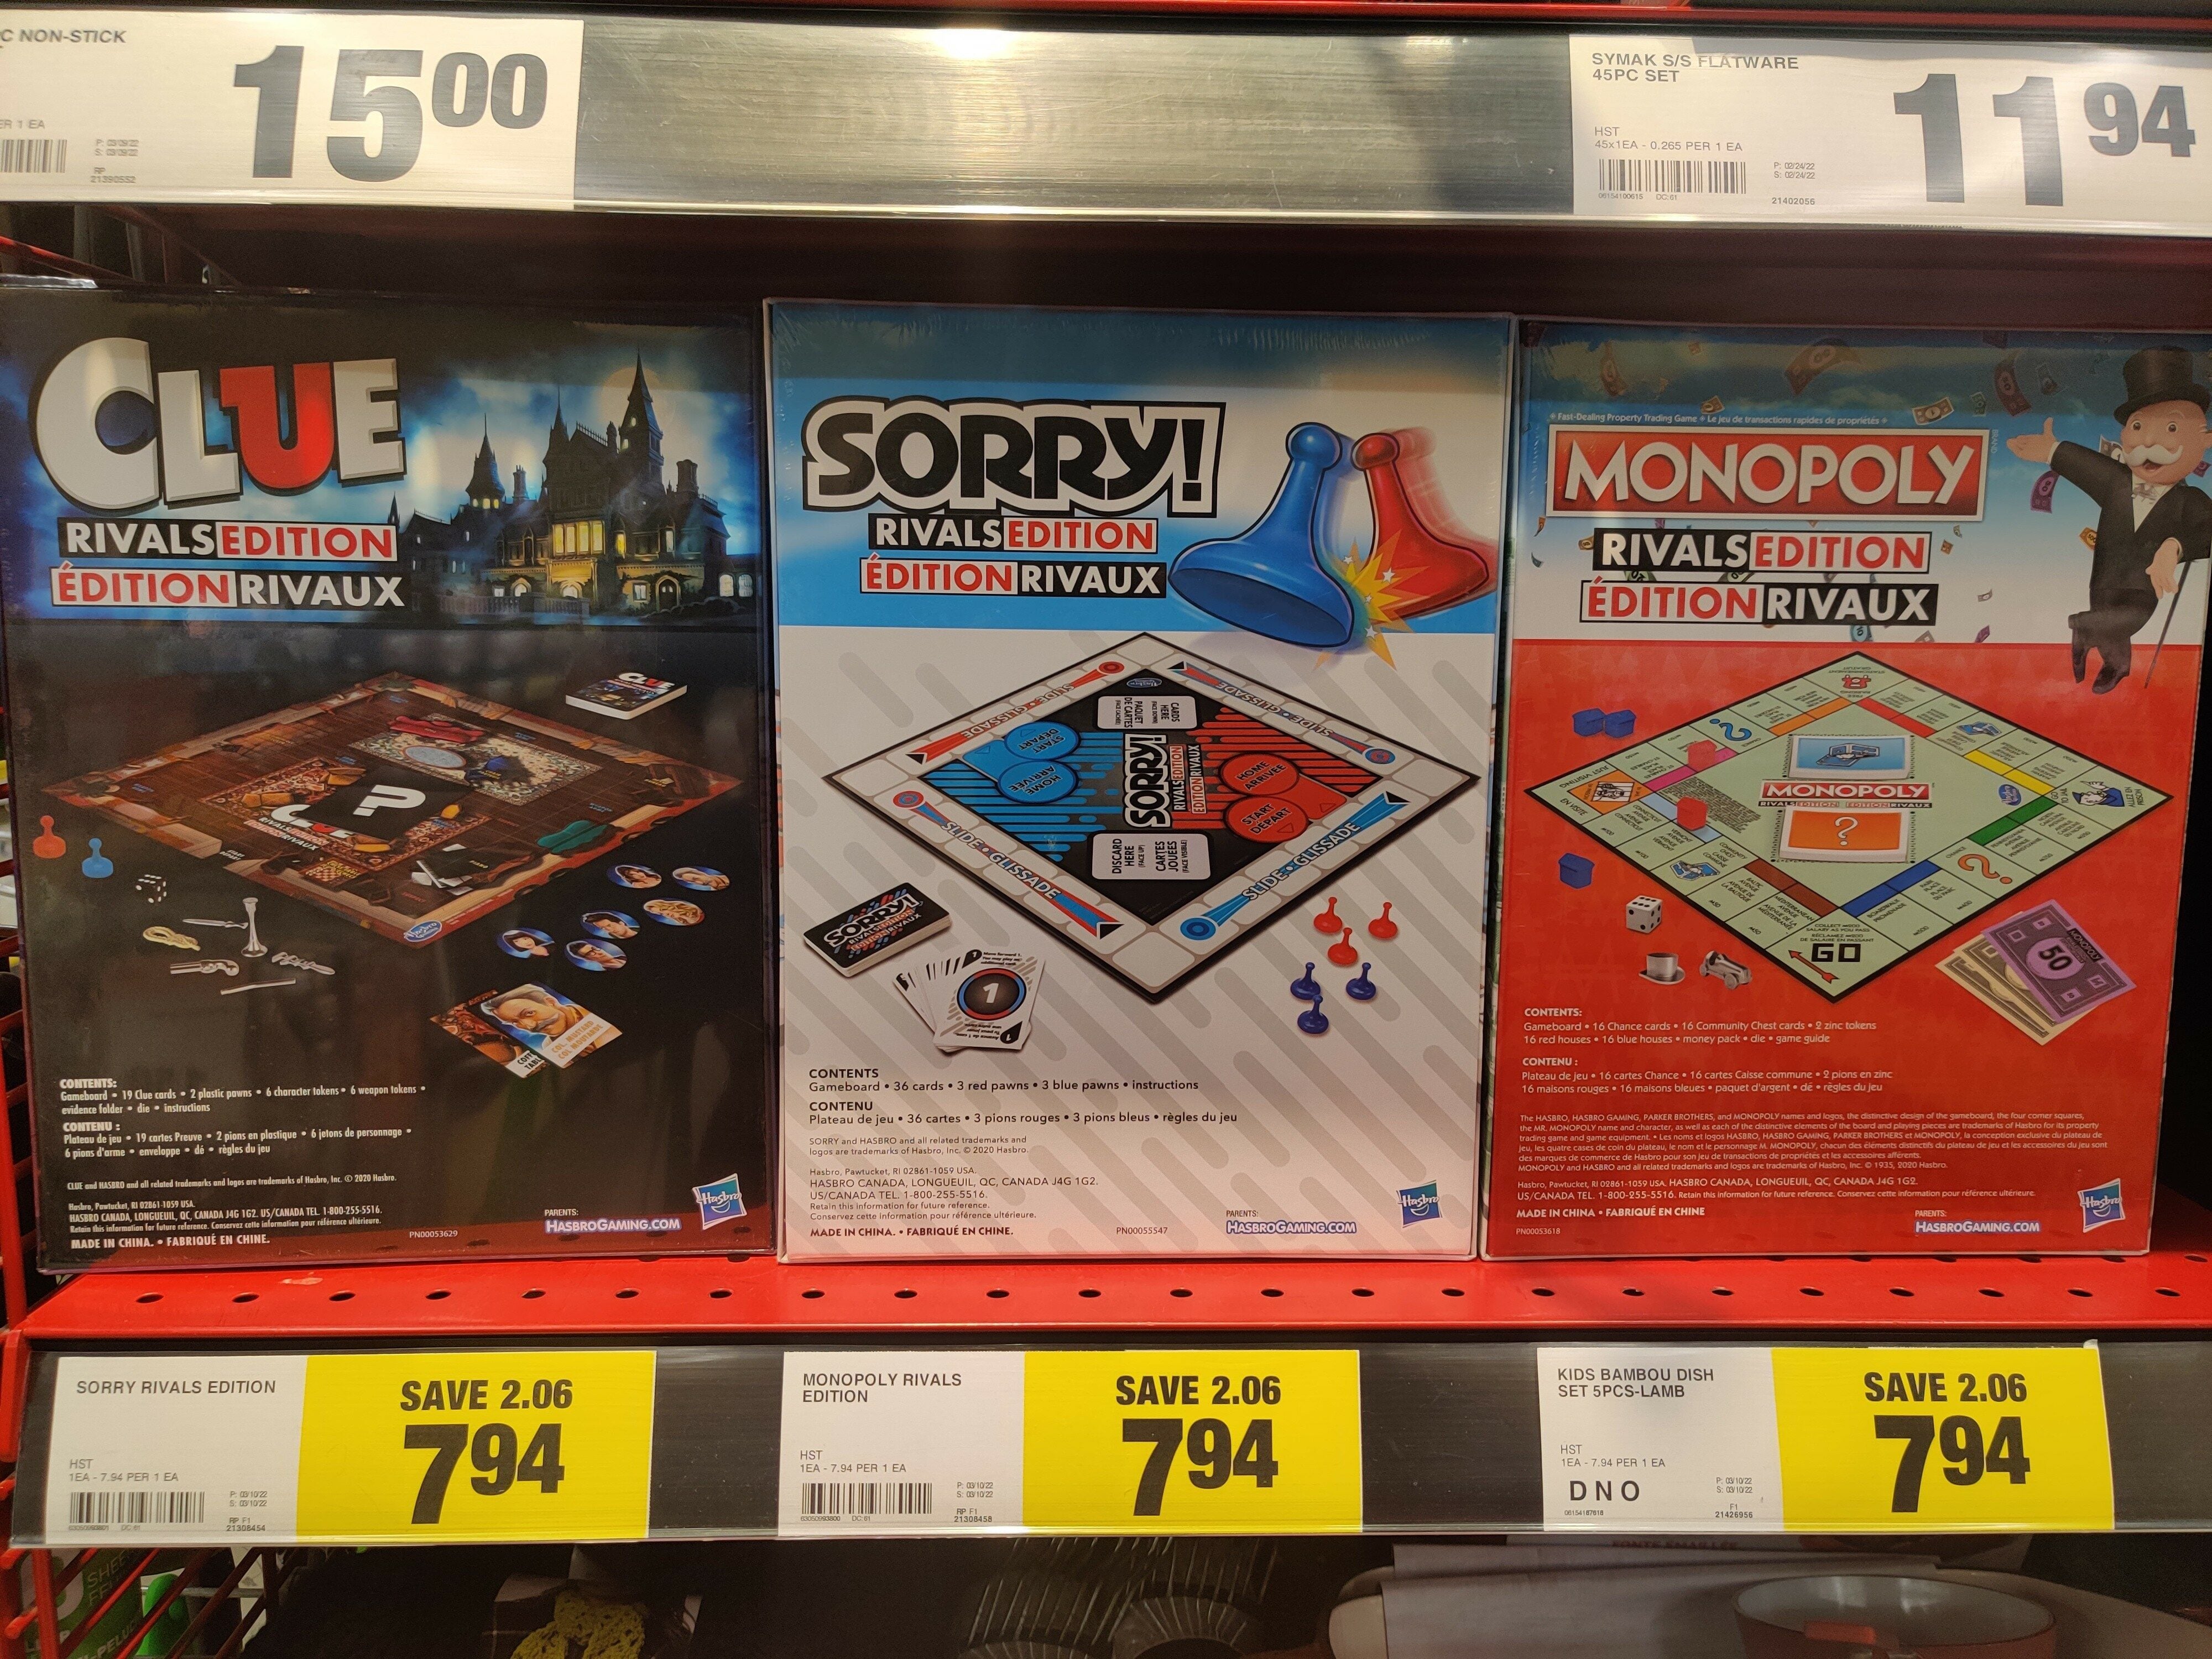 Sorry! Rivals Edition Board Game; 2 Player Game